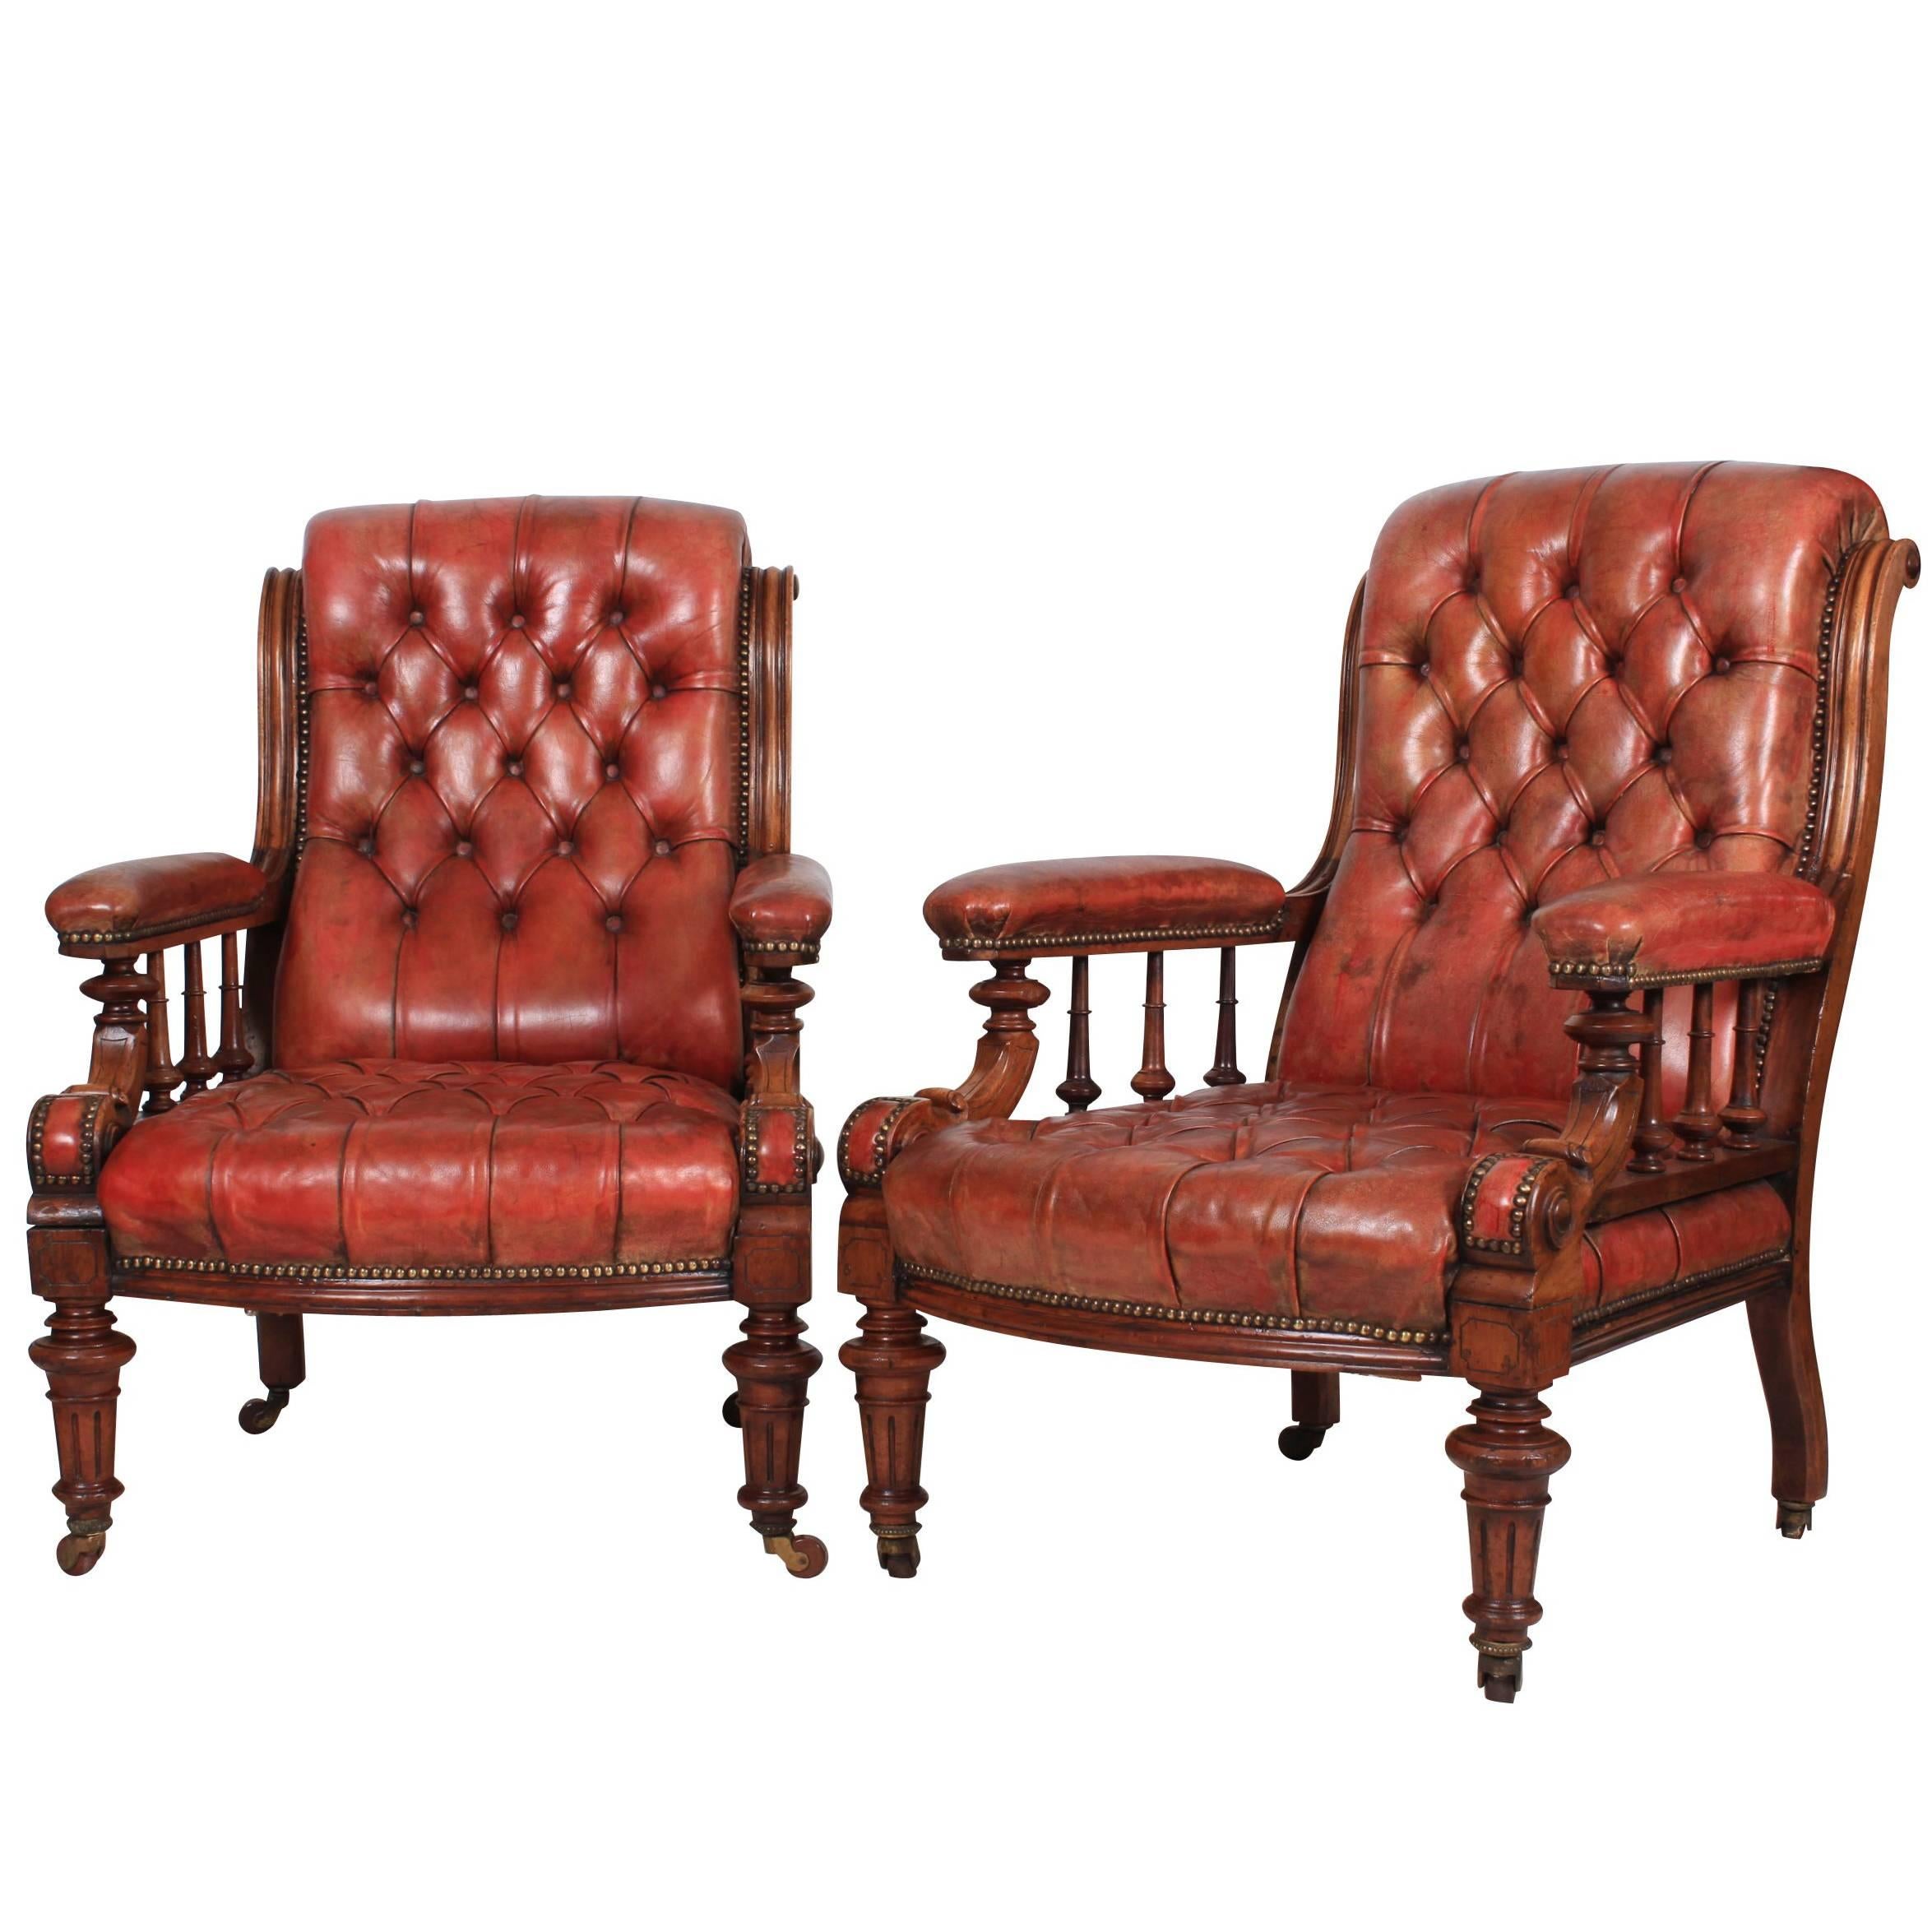 Superb Pair of Walnut and Leather Library Chairs